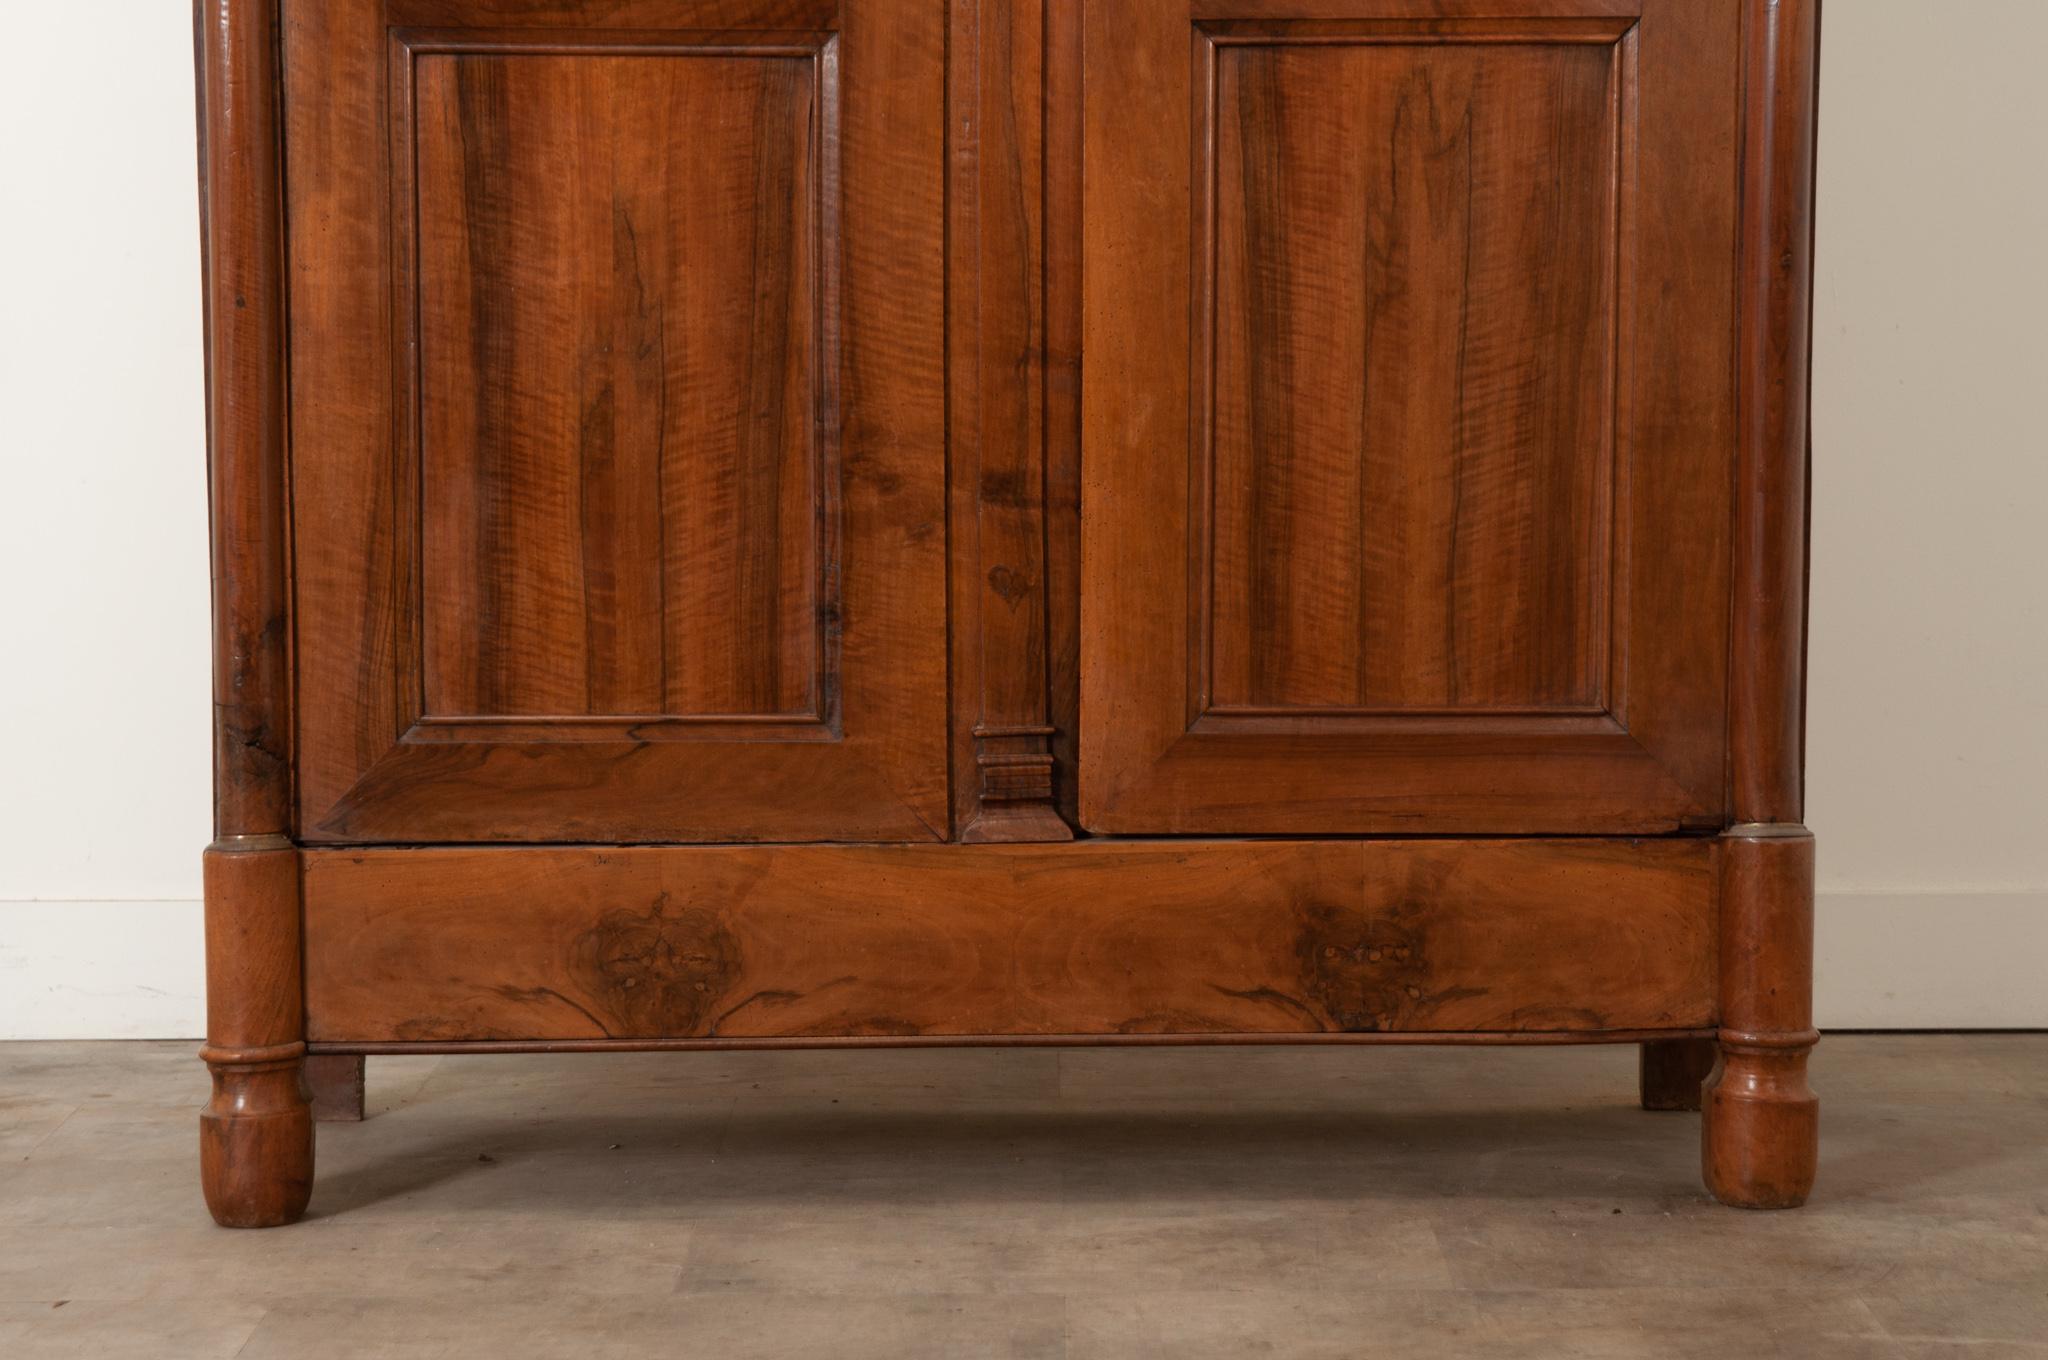 A handsome solid walnut Empire armoire, made in France during the 19th Century. This armoire features a pair of large bookmatched and paneled doors on hidden hinges, flanked by columns capped with gilt bronze ormolu at its capitals and bases. The